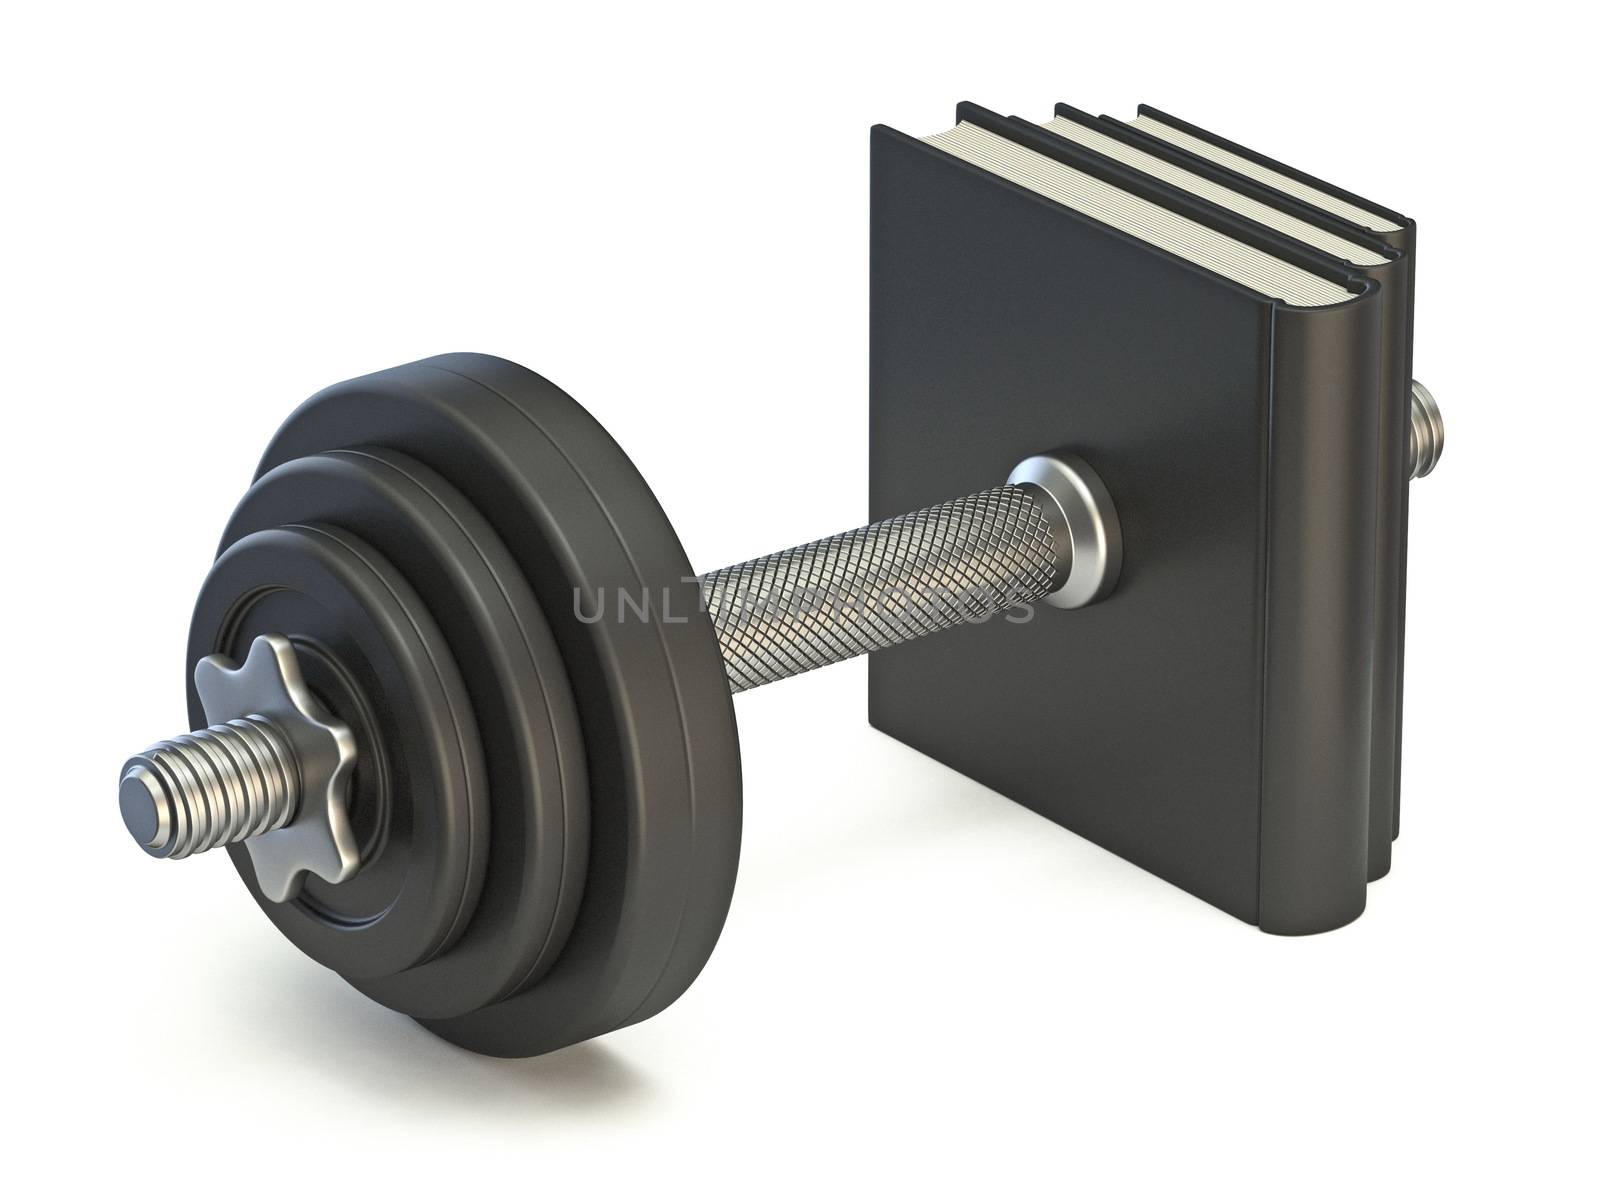 Dumbbell made from stack of books 3D by djmilic